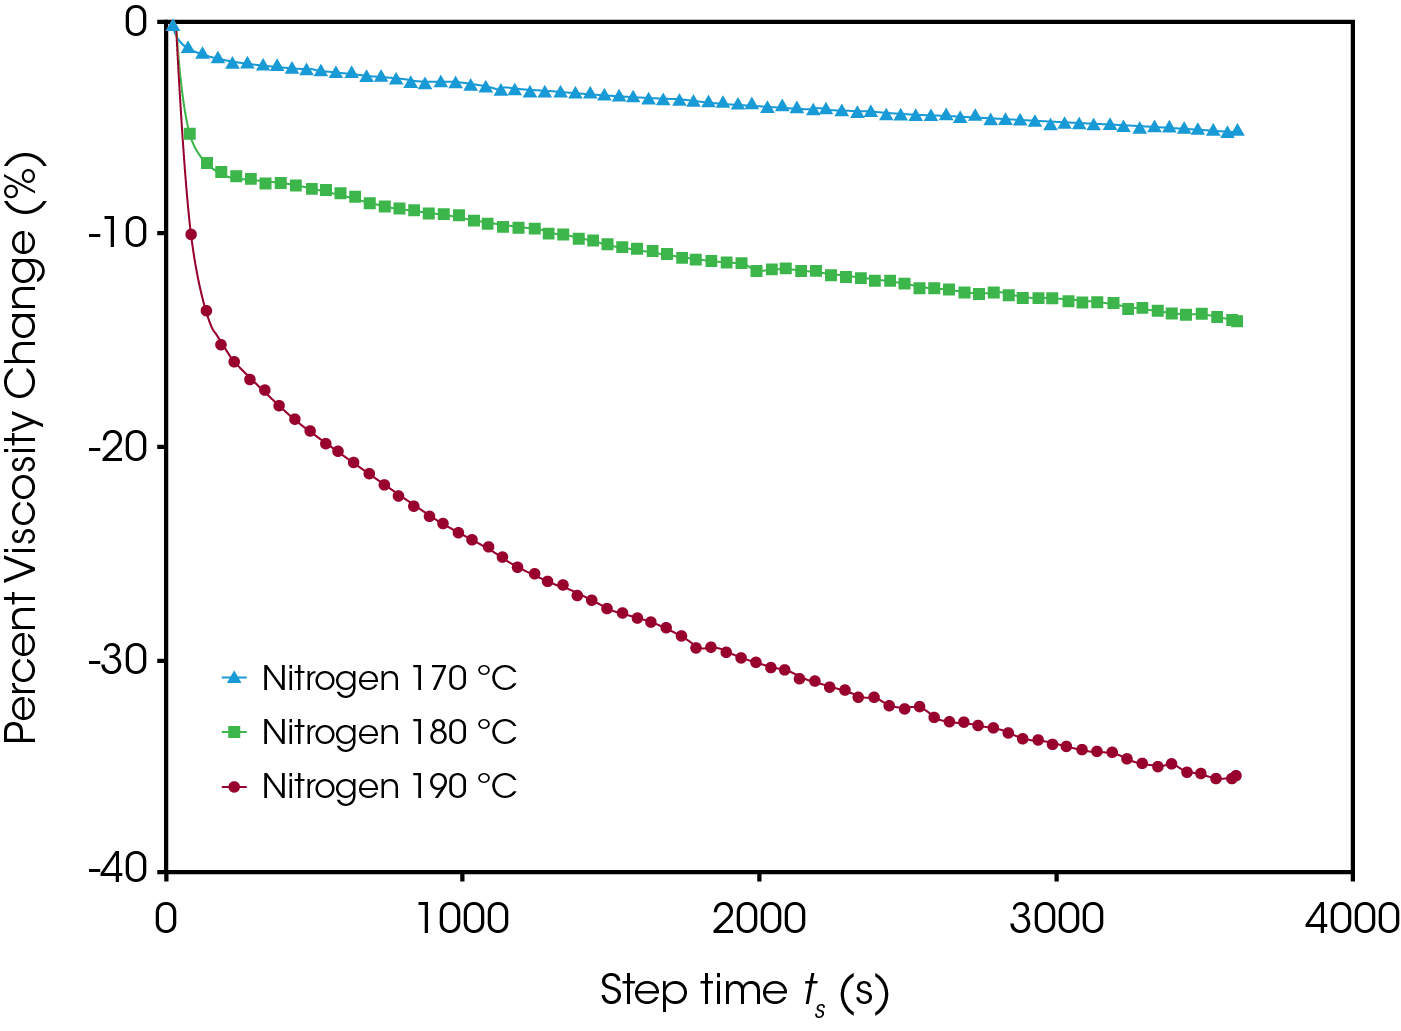 Figure 4. (Time Sweep Data) Percent viscosity change is plotted as a function of time for three PLA samples subjected to a nitrogen atmosphere at various temperatures of 170 °C, 180 °C, and 190 °C.